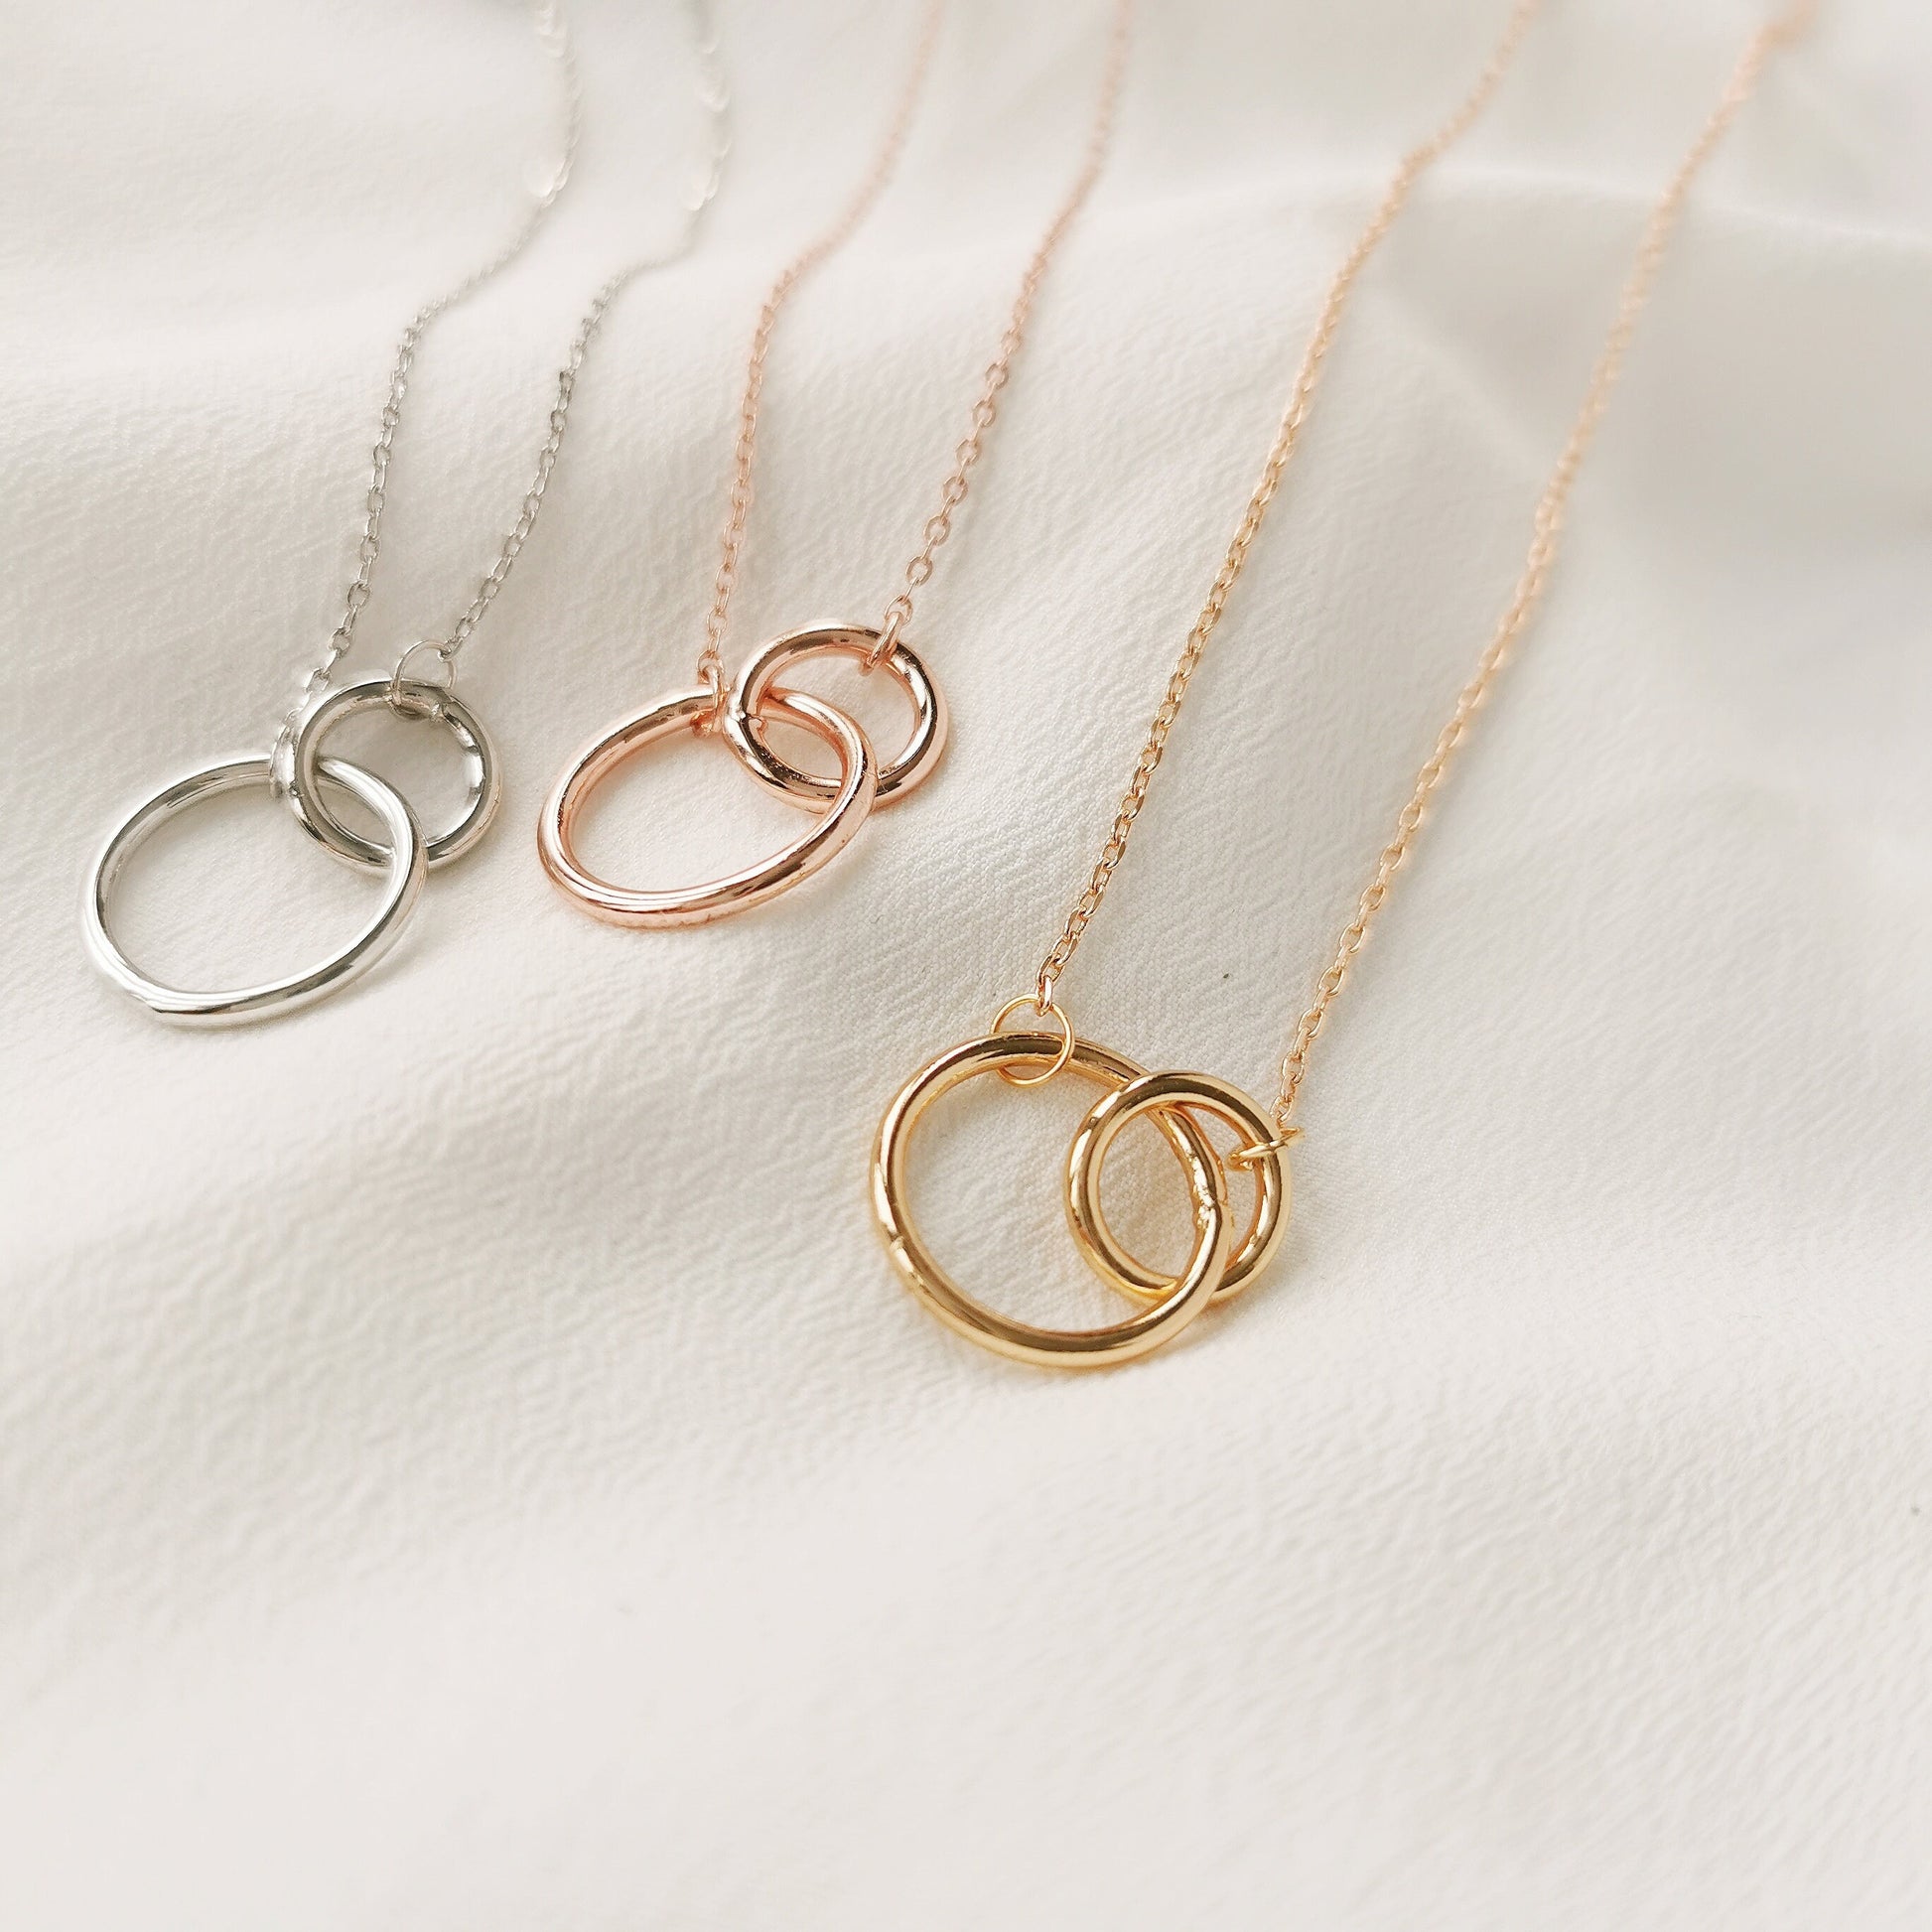 Sterling Silver Double Circle Necklace, 925 Silver Dainty Interlinking Necklace, Gold Minimalist Dainty Necklace, Gift For Her, Granny Gift